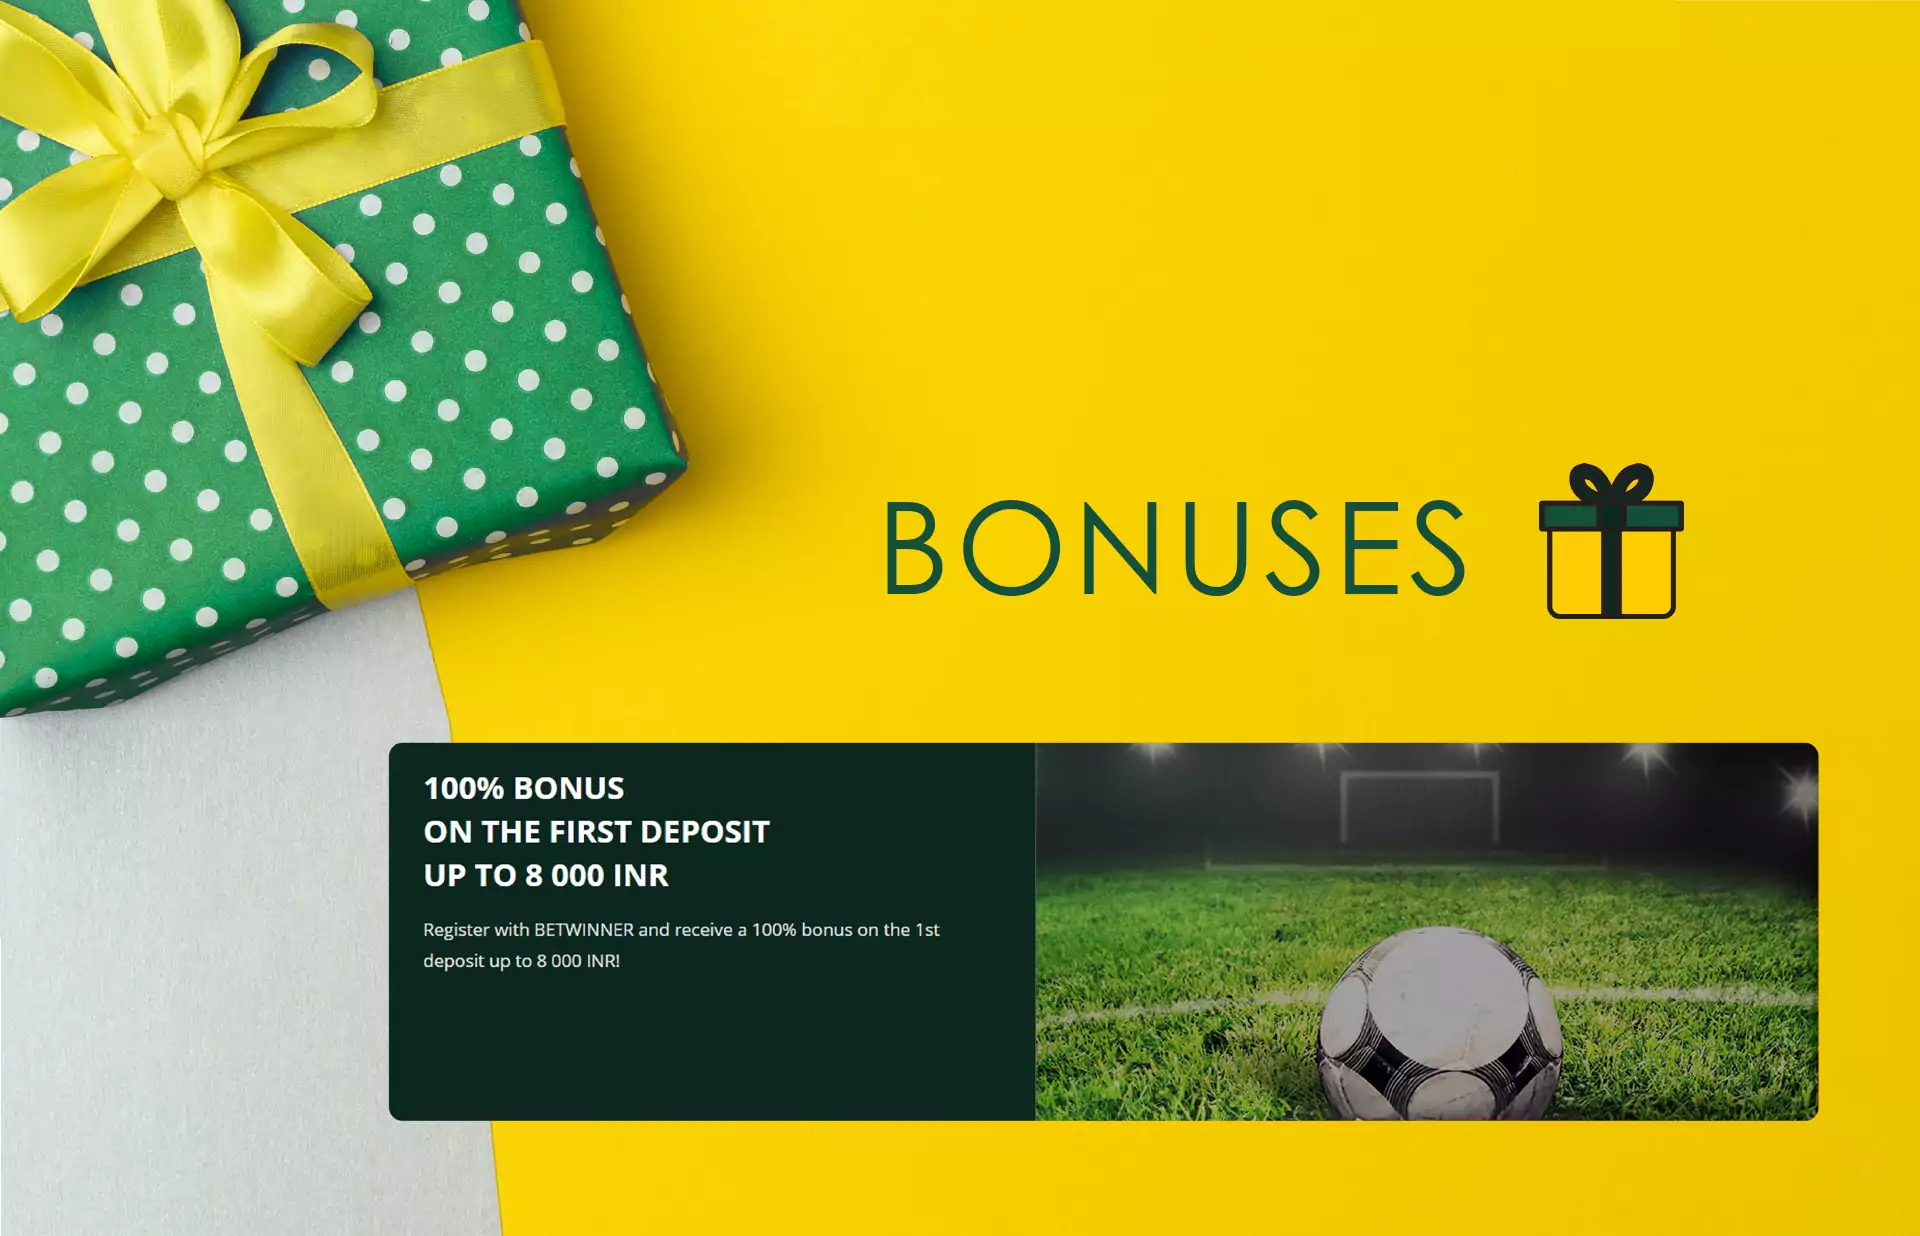 Look through bonus offers that Betwinner provides for new users.